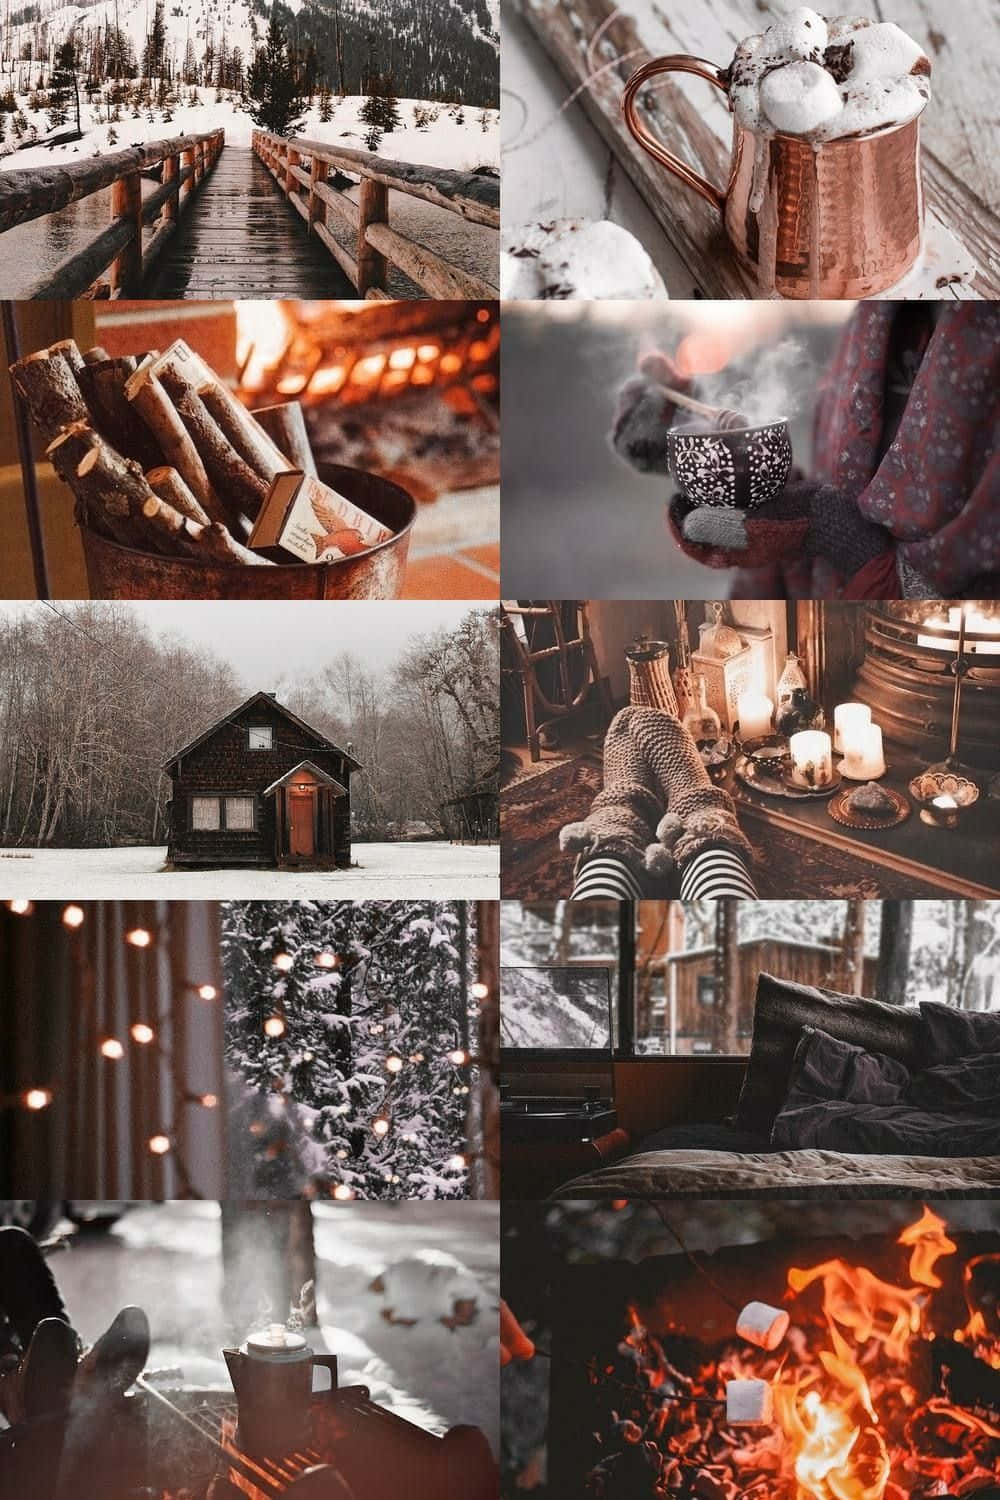 A Collage Of Pictures Of A Fireplace And A Fire Wallpaper